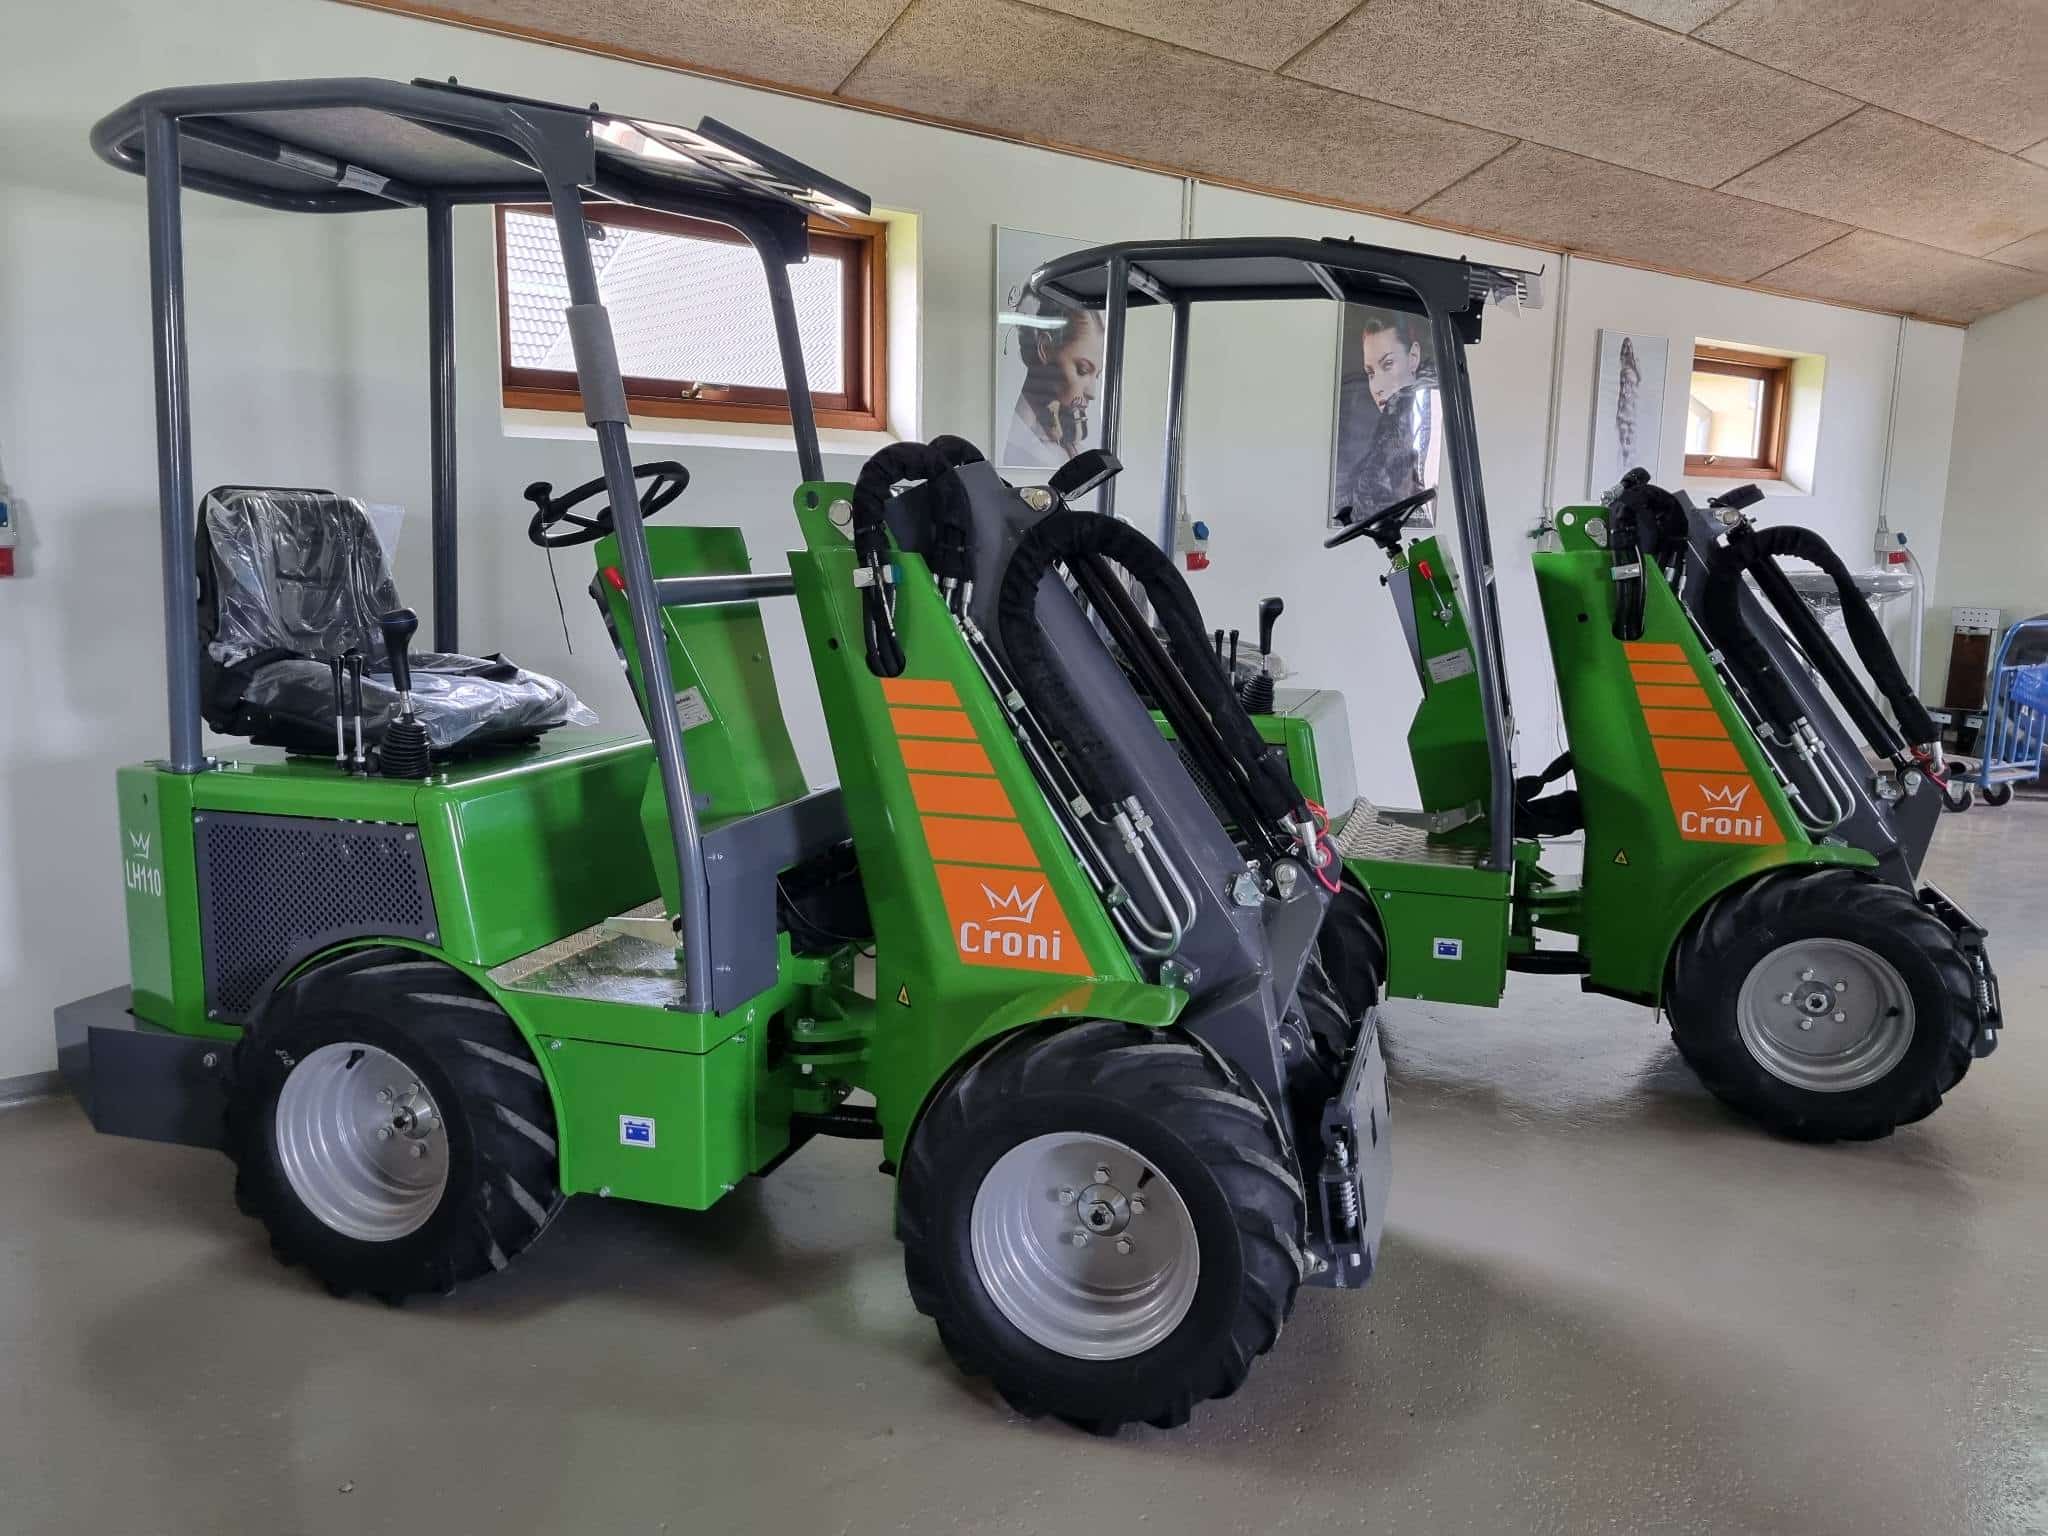 Which mini loader to choose from?